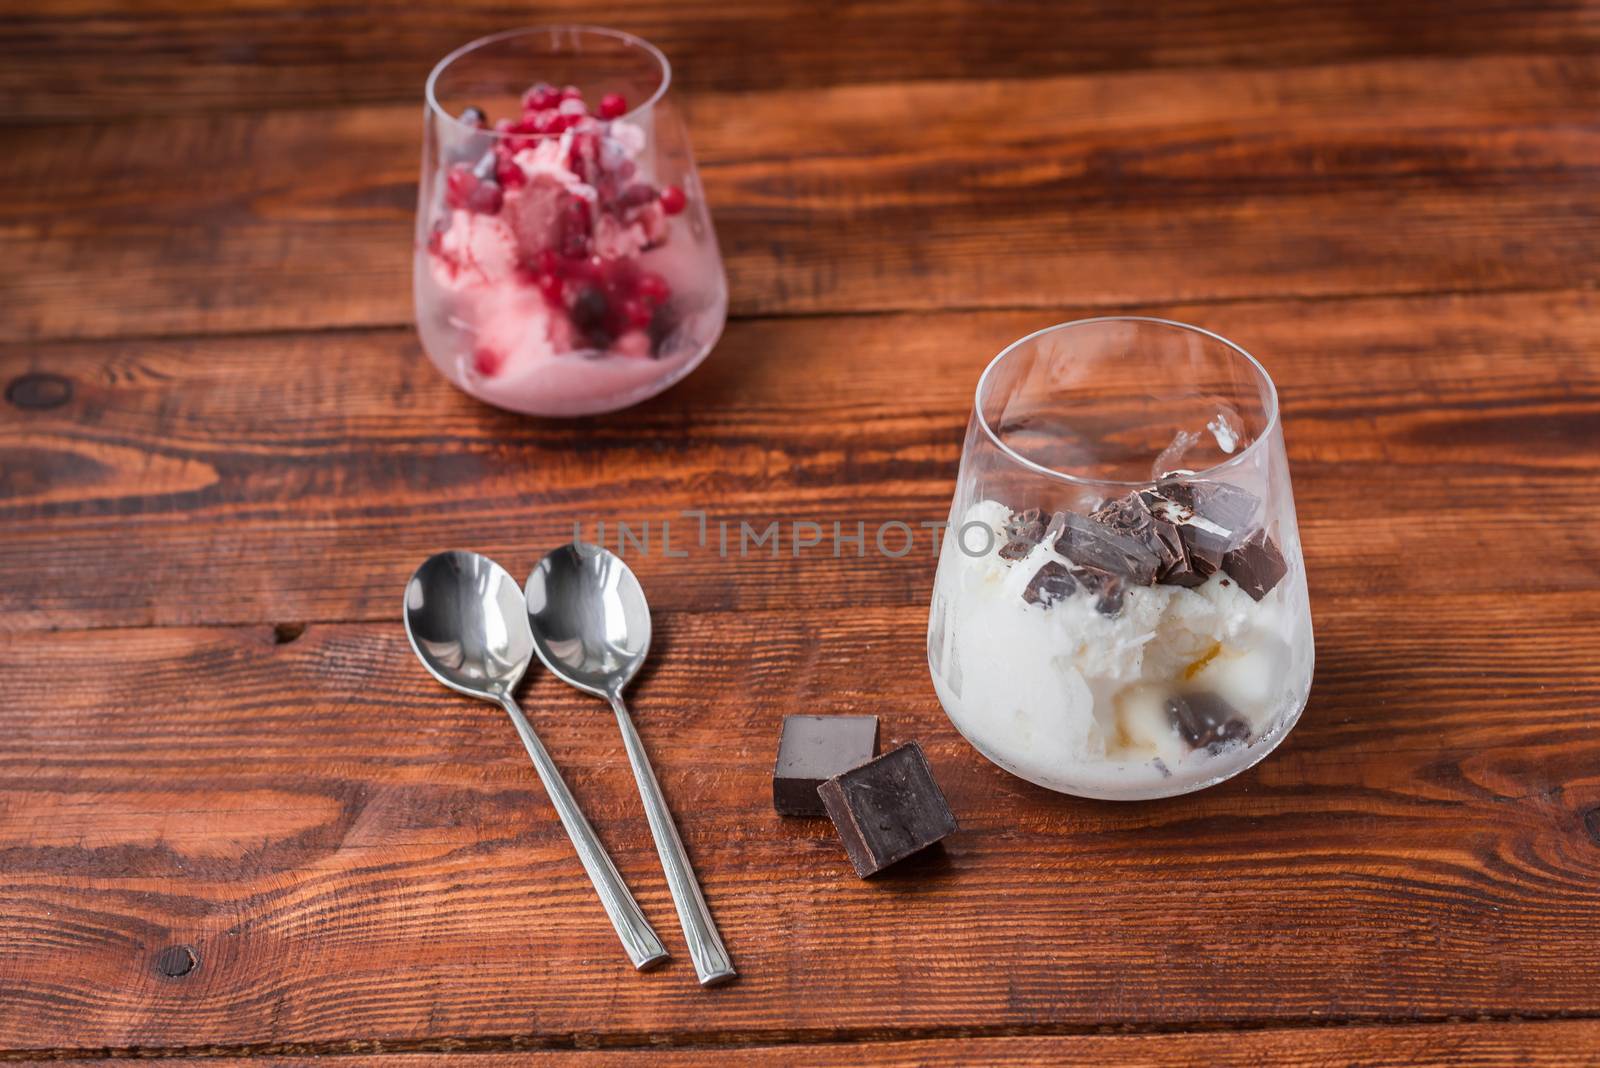 Sweet desert with ice cream, chocolate and berries in glass